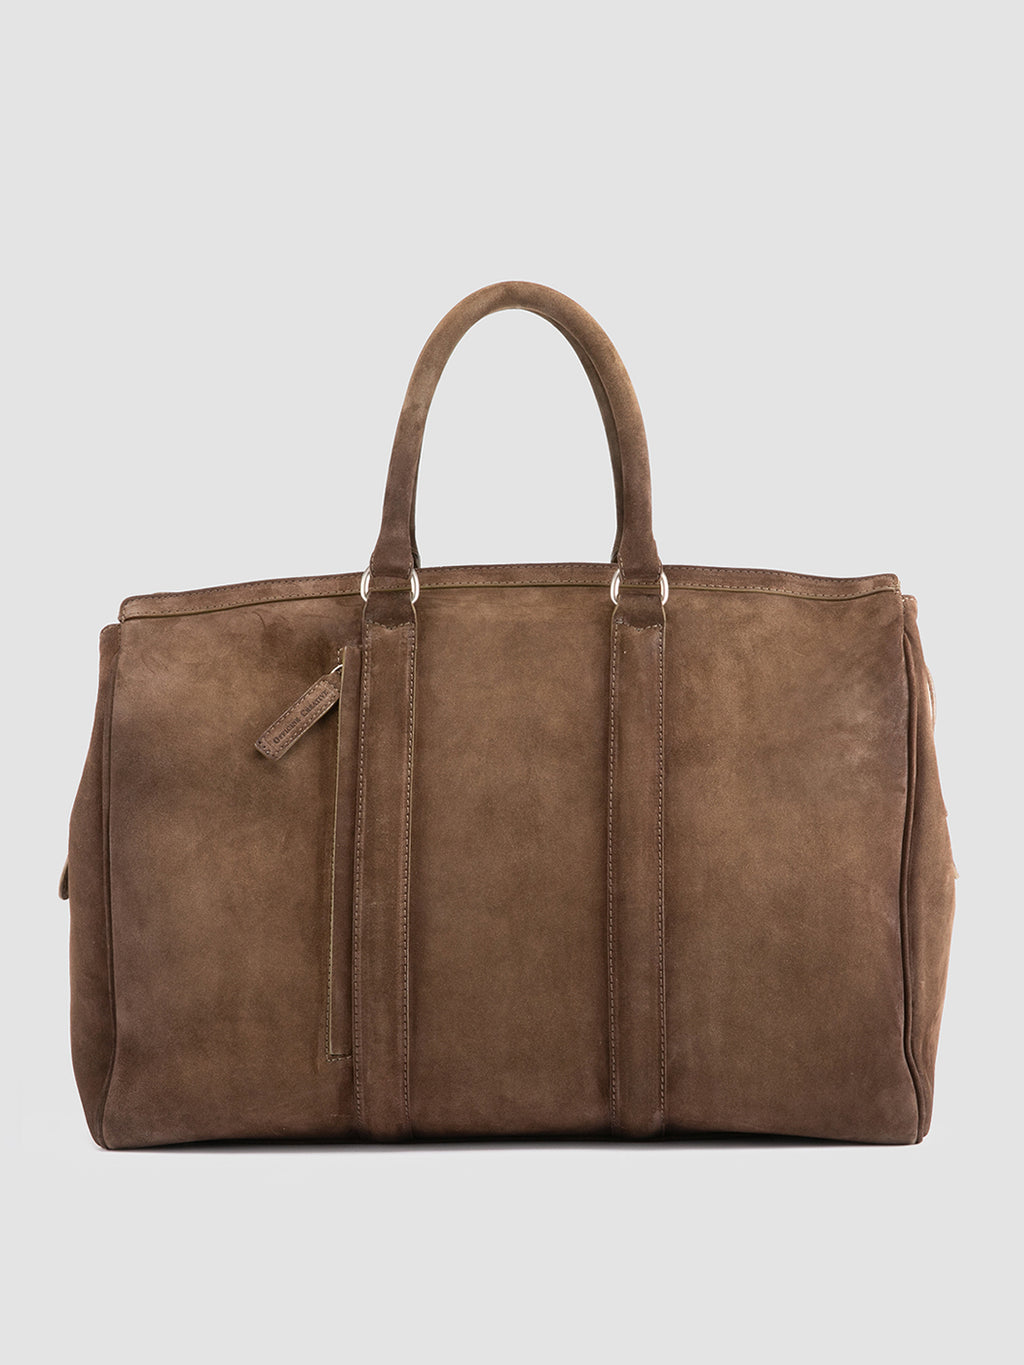 QUENTIN 009 - Brown Suede Bag